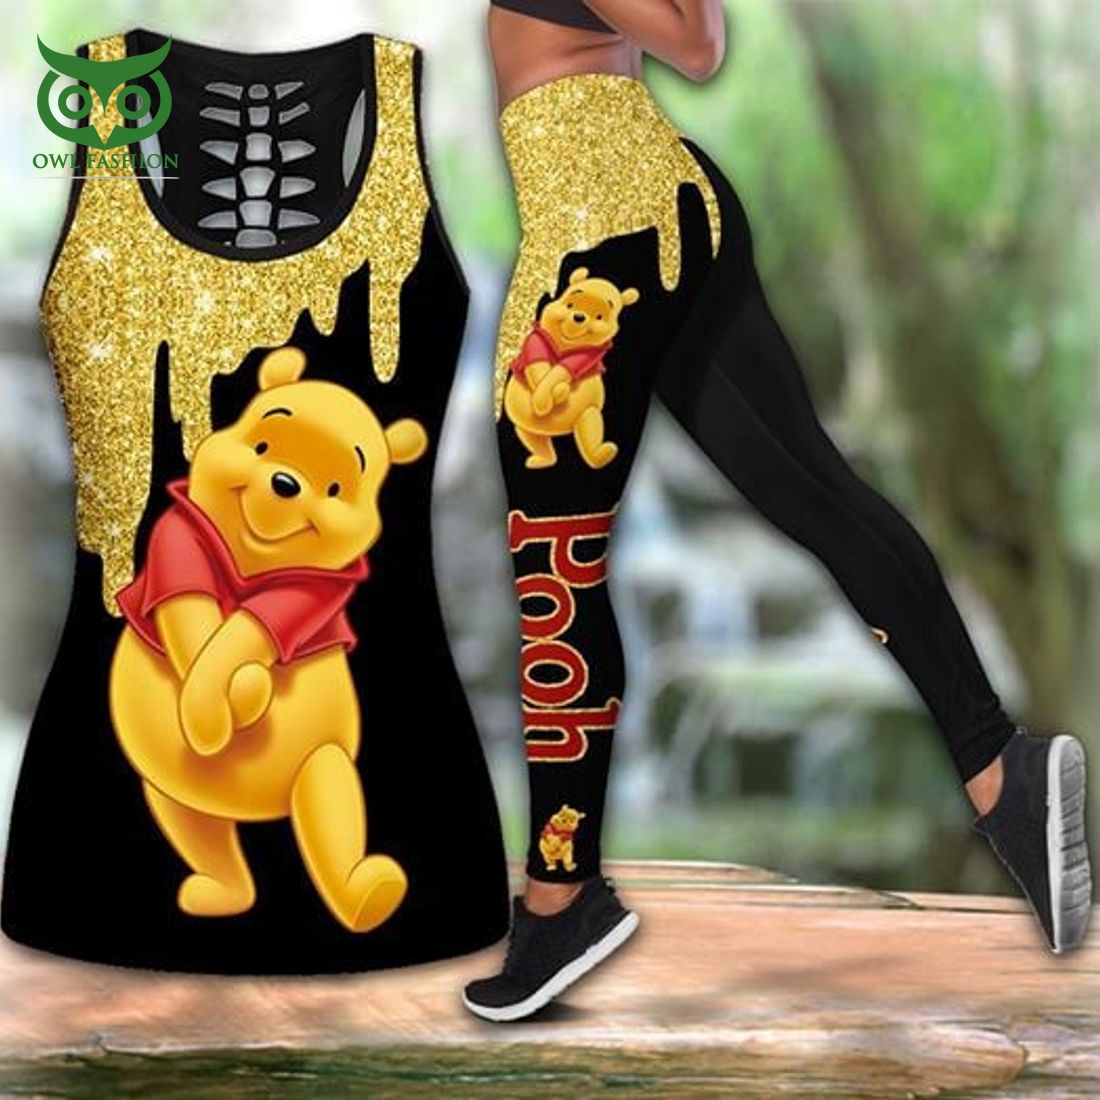 Winnie The Pooh Blink Yellow Drip Tank Top and Legging Out of the world